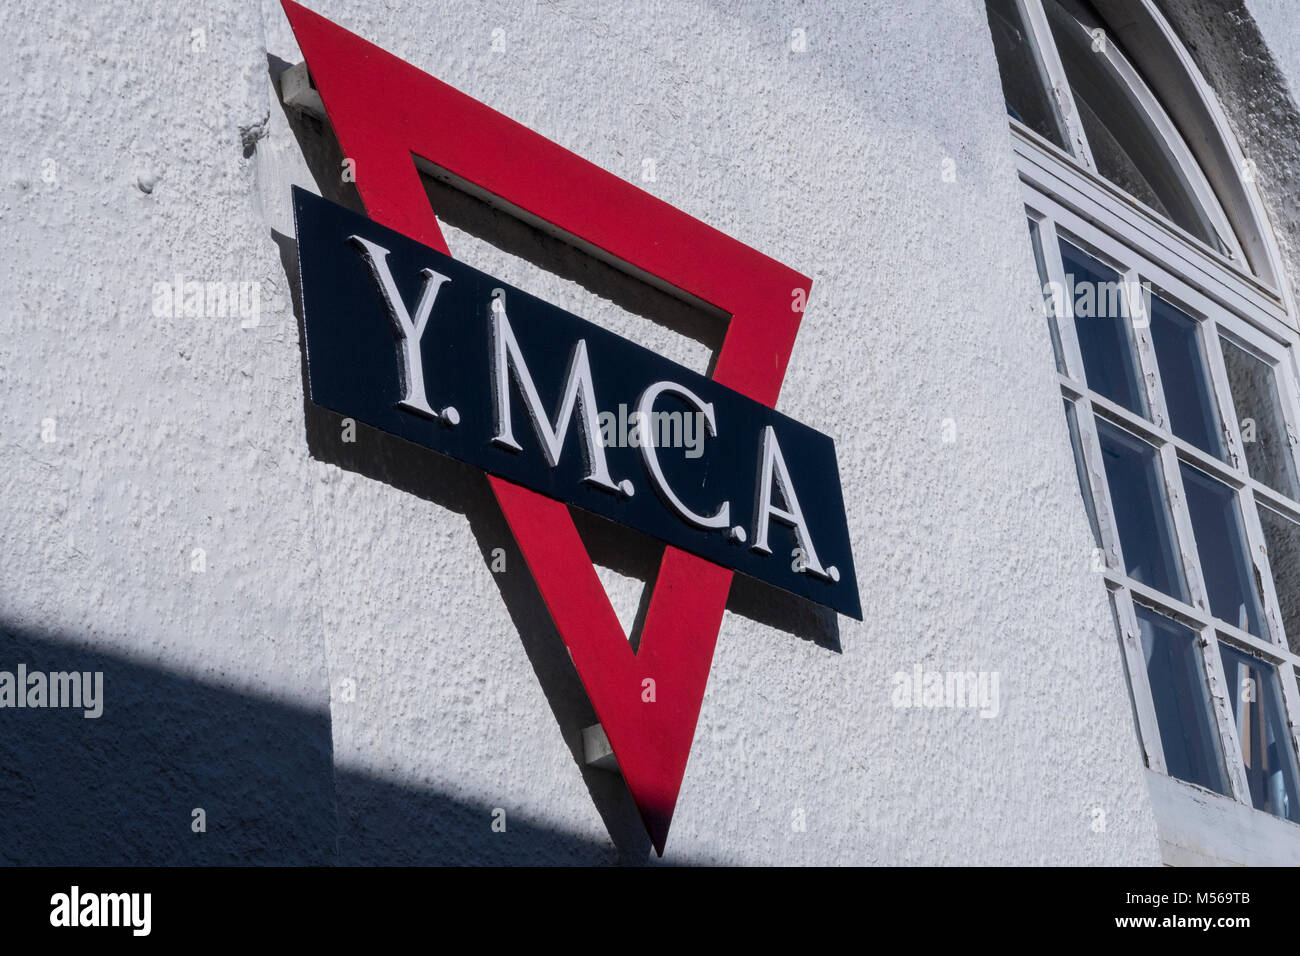 YMCA sign on a wall in Sidmouth, Devon. Stock Photo